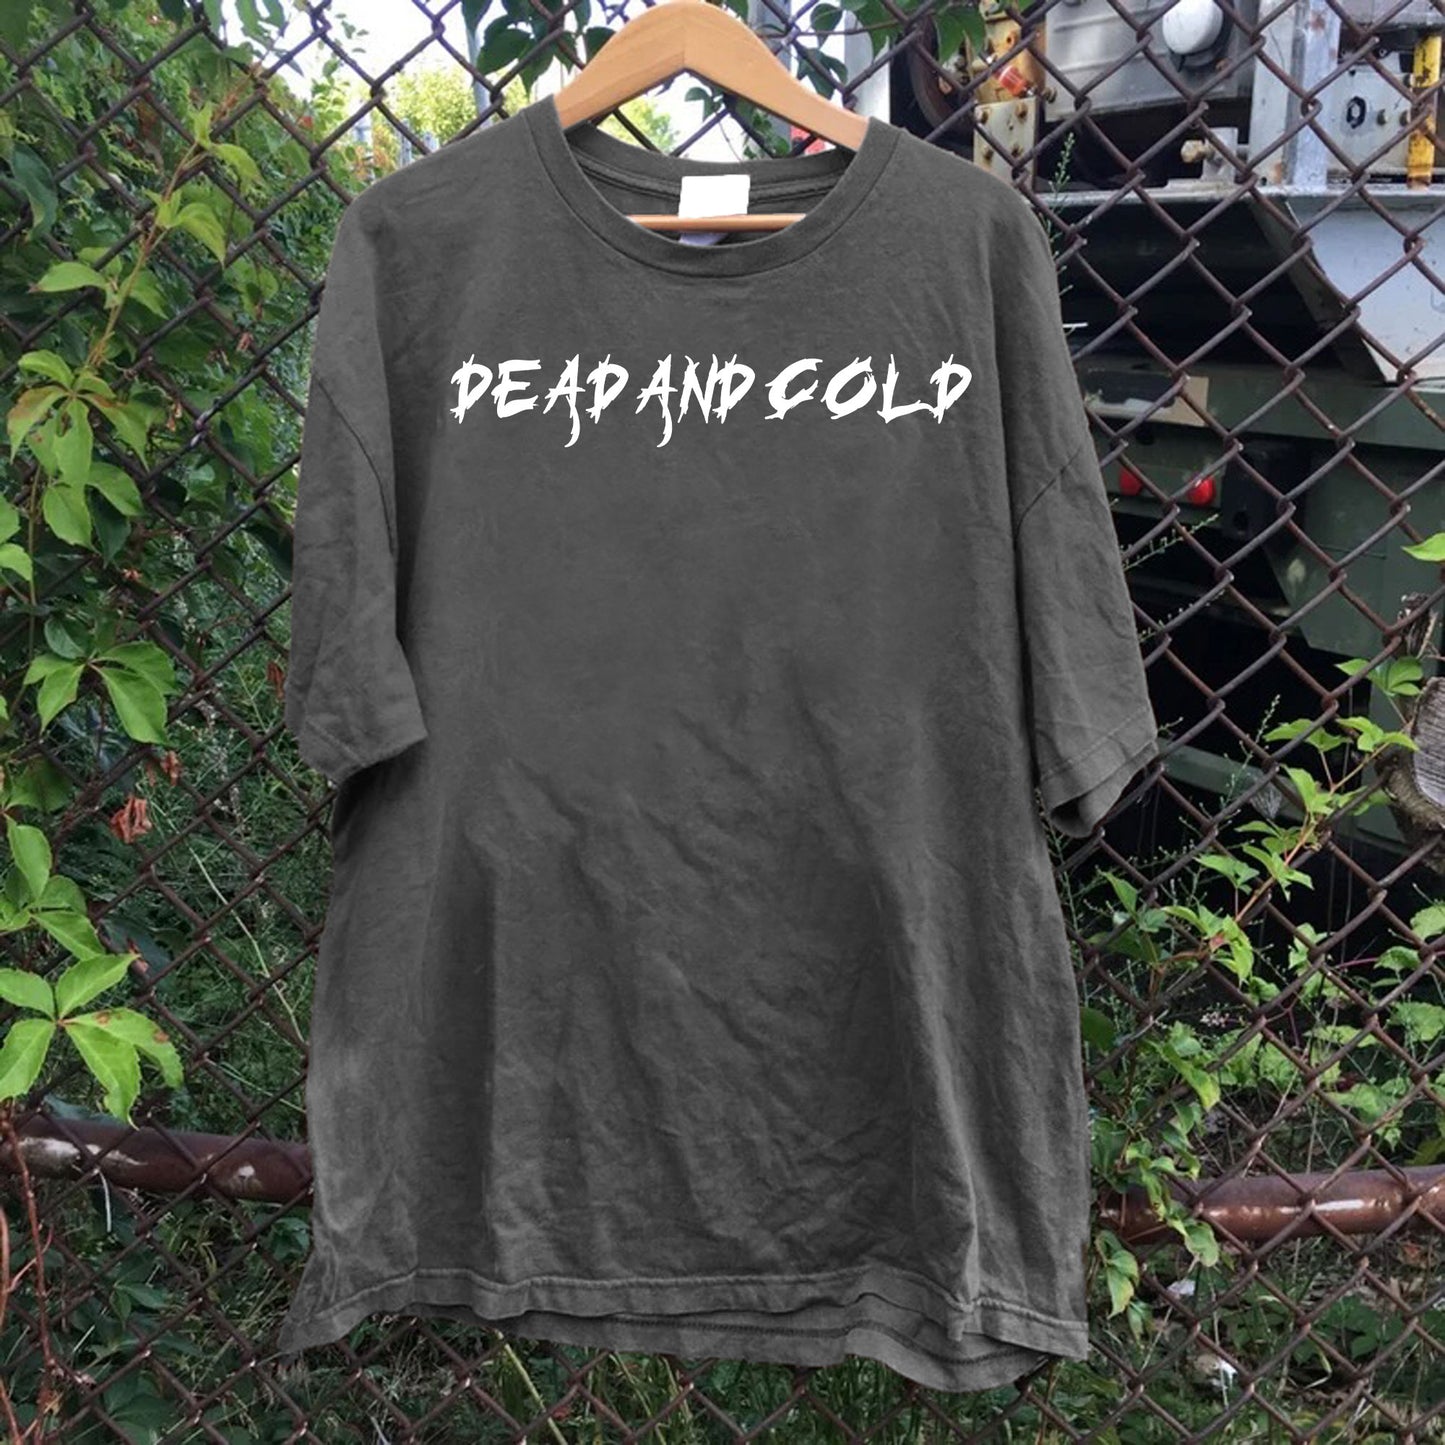 Dead And Cold Font Tee